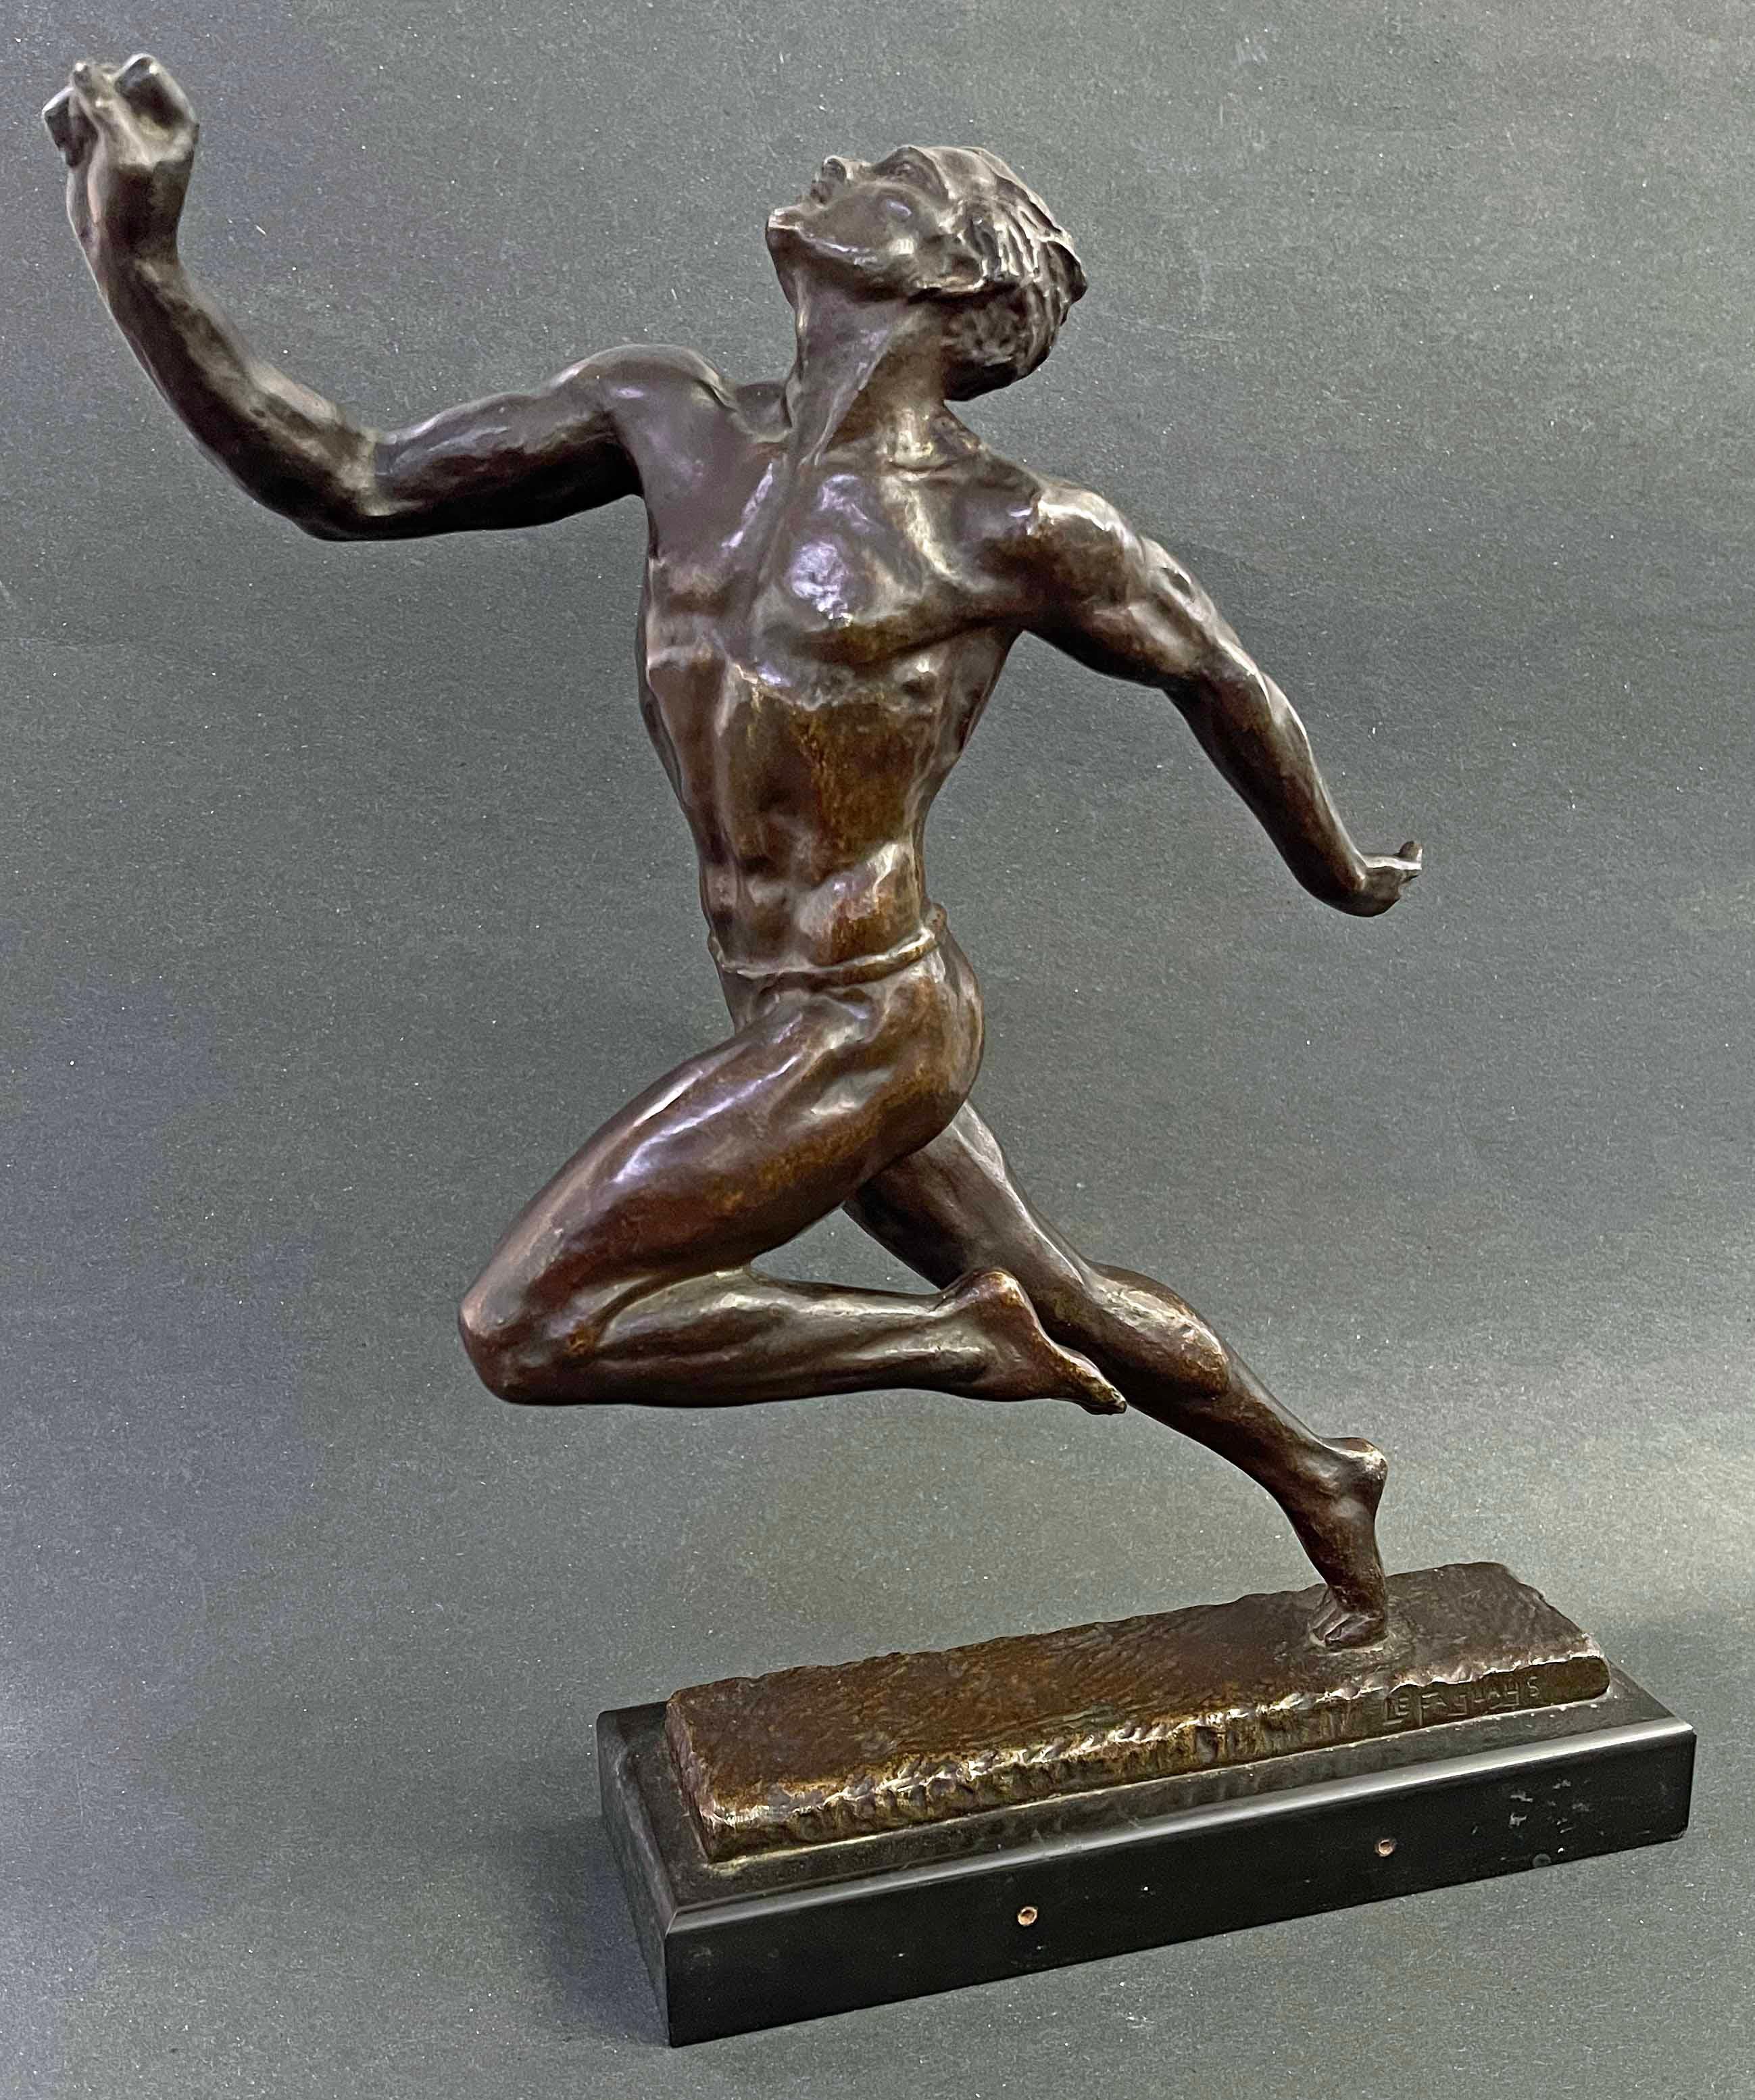 Beautifully cast and finished with a rich, brown patina, this extremely rare bronze by Pierre Le Faguays depicts a nude runner racing at top speed, his head thrown up in relief and exaltation as he crosses the finish line, his lithe limbs straining